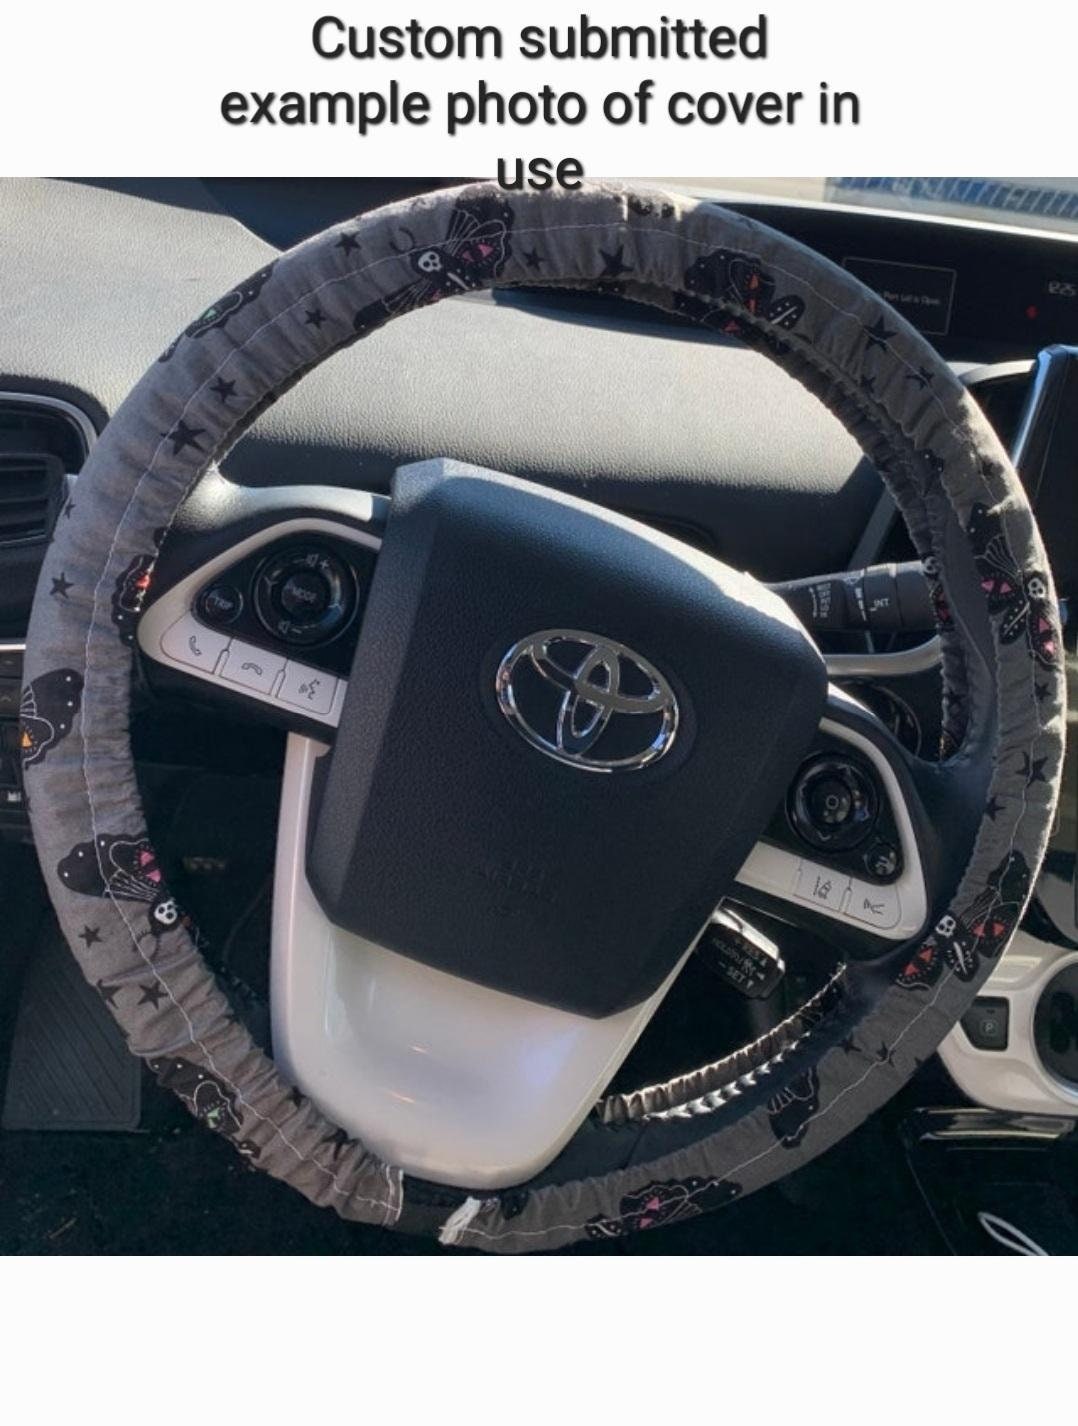 Floral Steering Wheel Cover, 100% Cotton, Washable, Custom Car Accessories - Harlow's Store and Garden Gifts